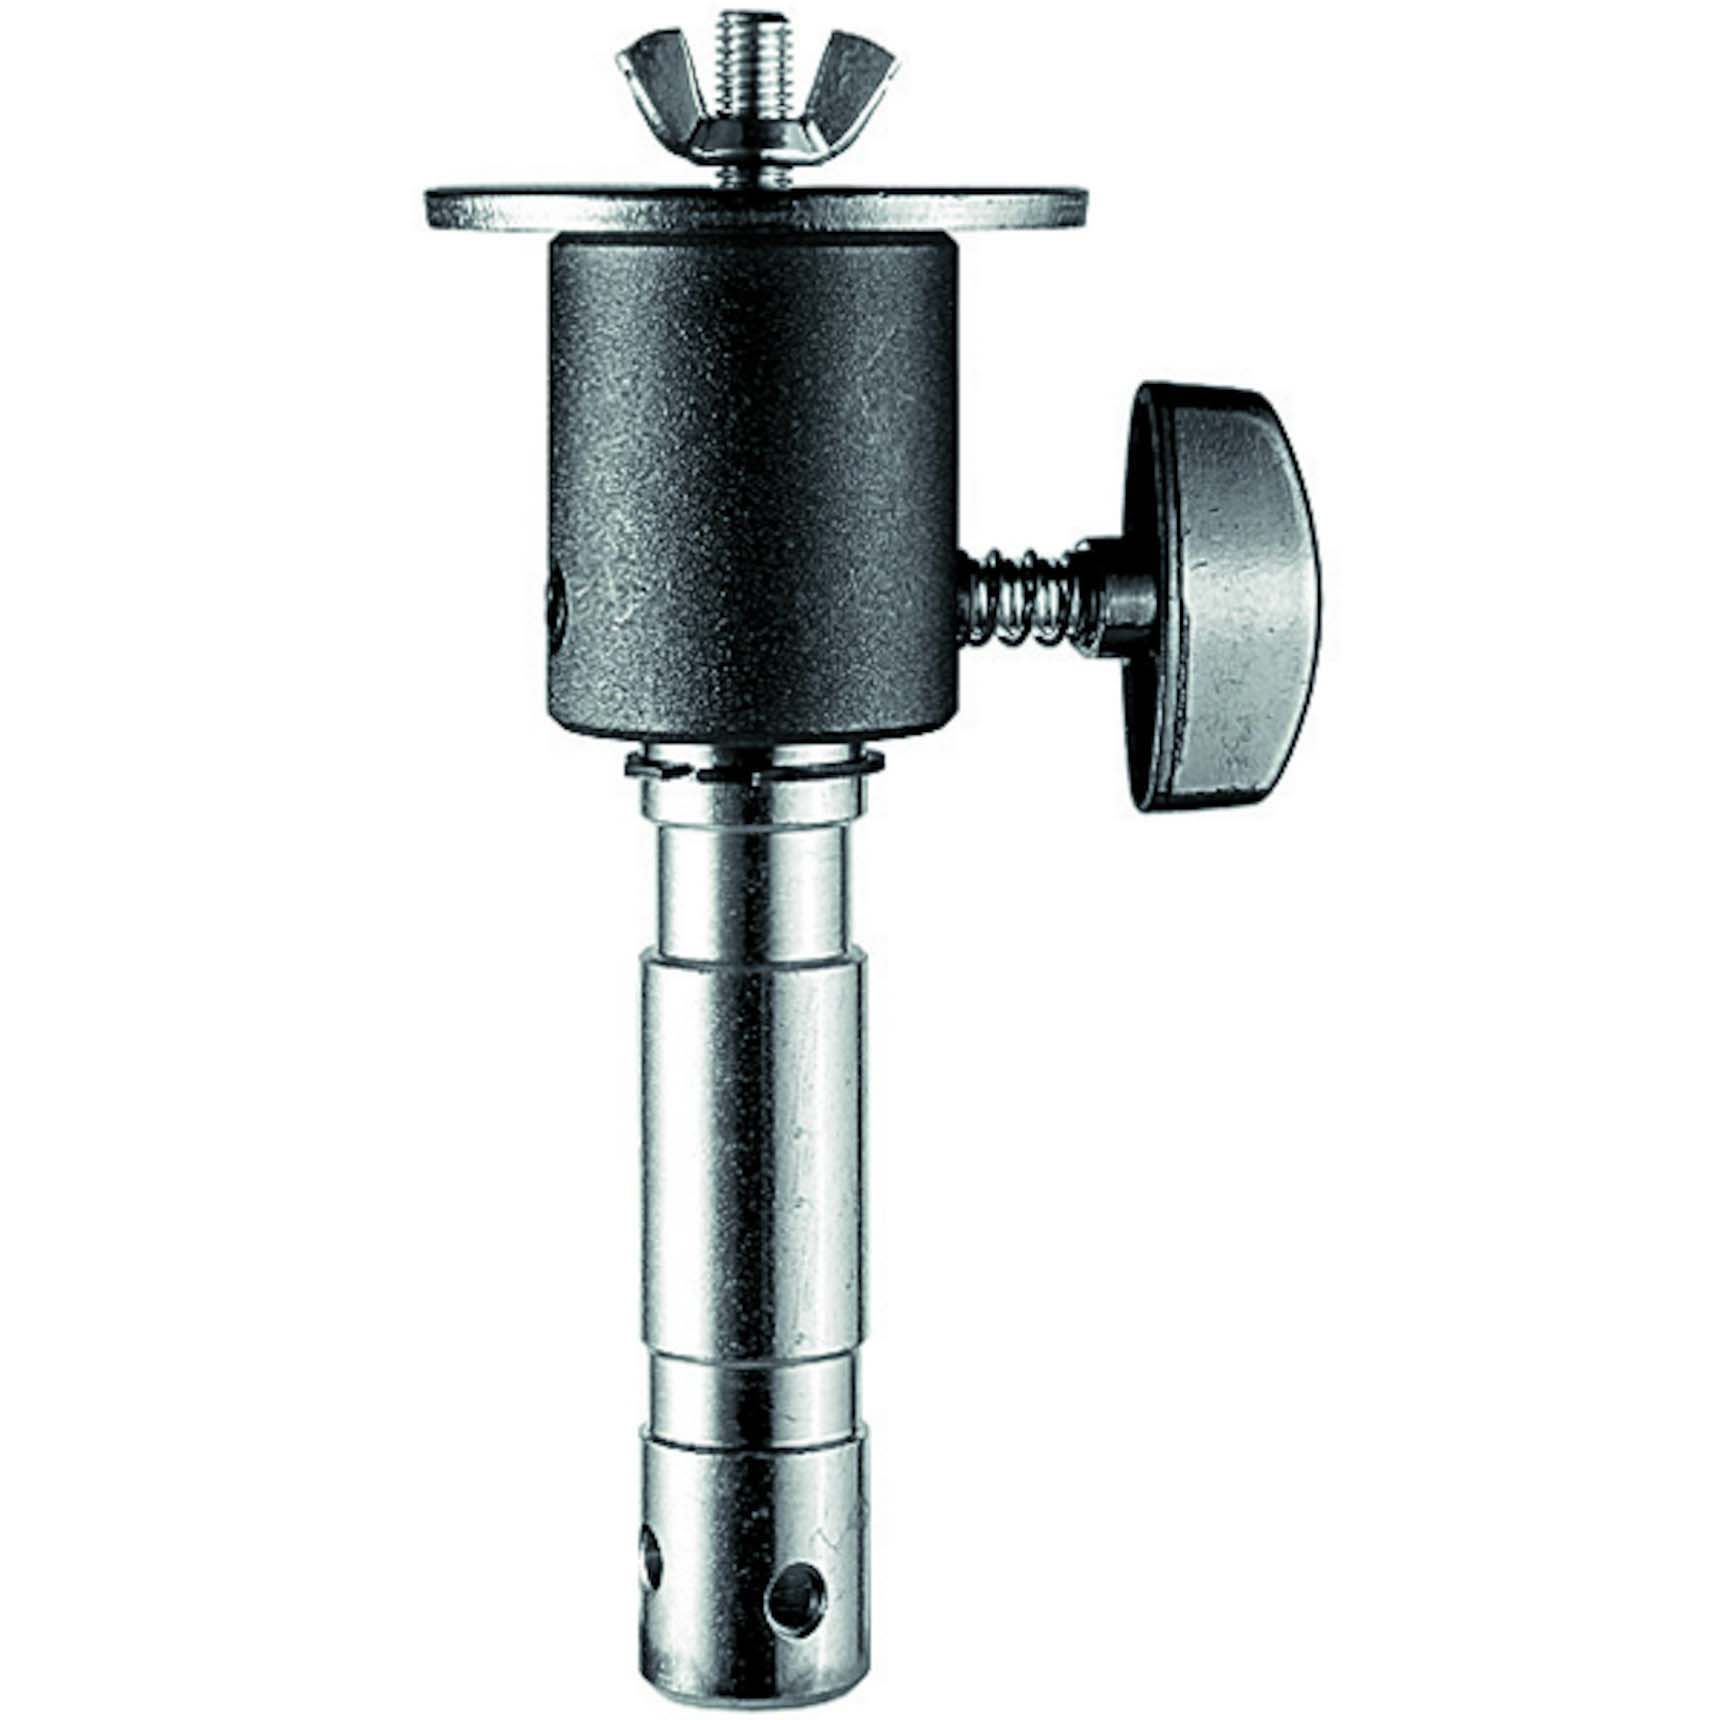 SPIGOT MANFROTTO 616-12 PAN M12 MANFROTTO 